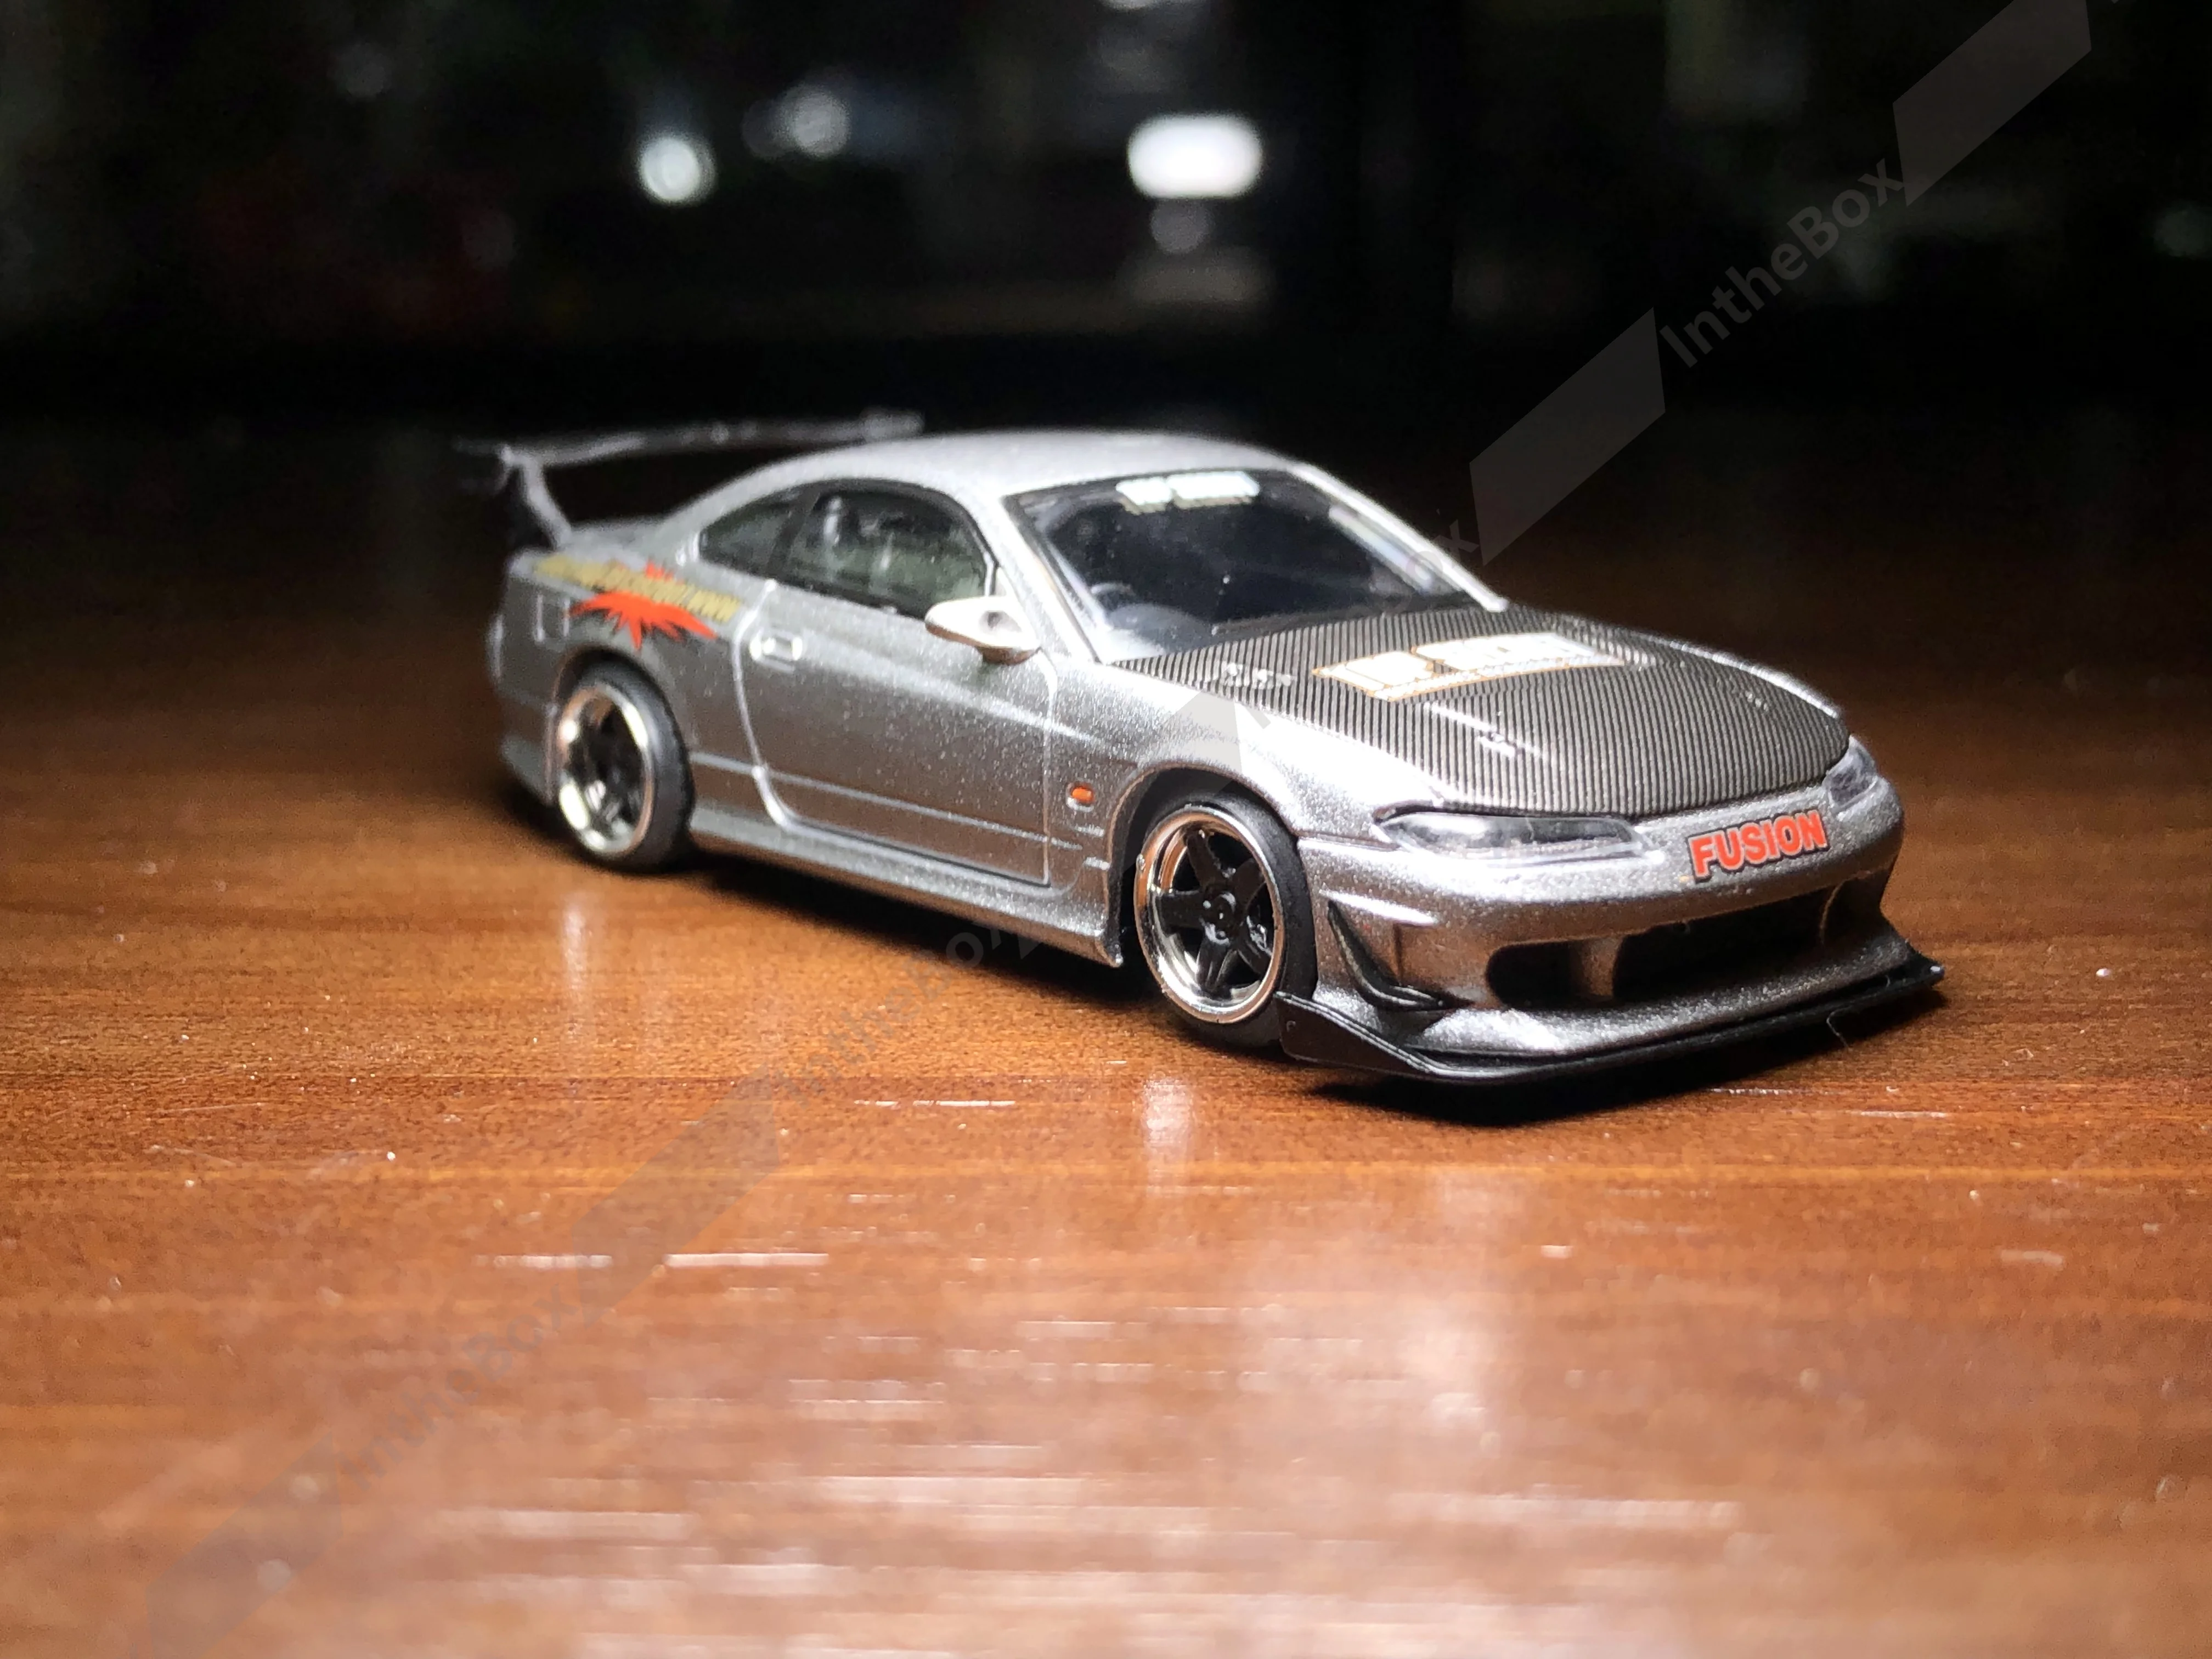 

Mini GT 1/64 #545 Silvia Top Secret (S15) Silver Diecast Model Car Collection Limited Edition Hobby